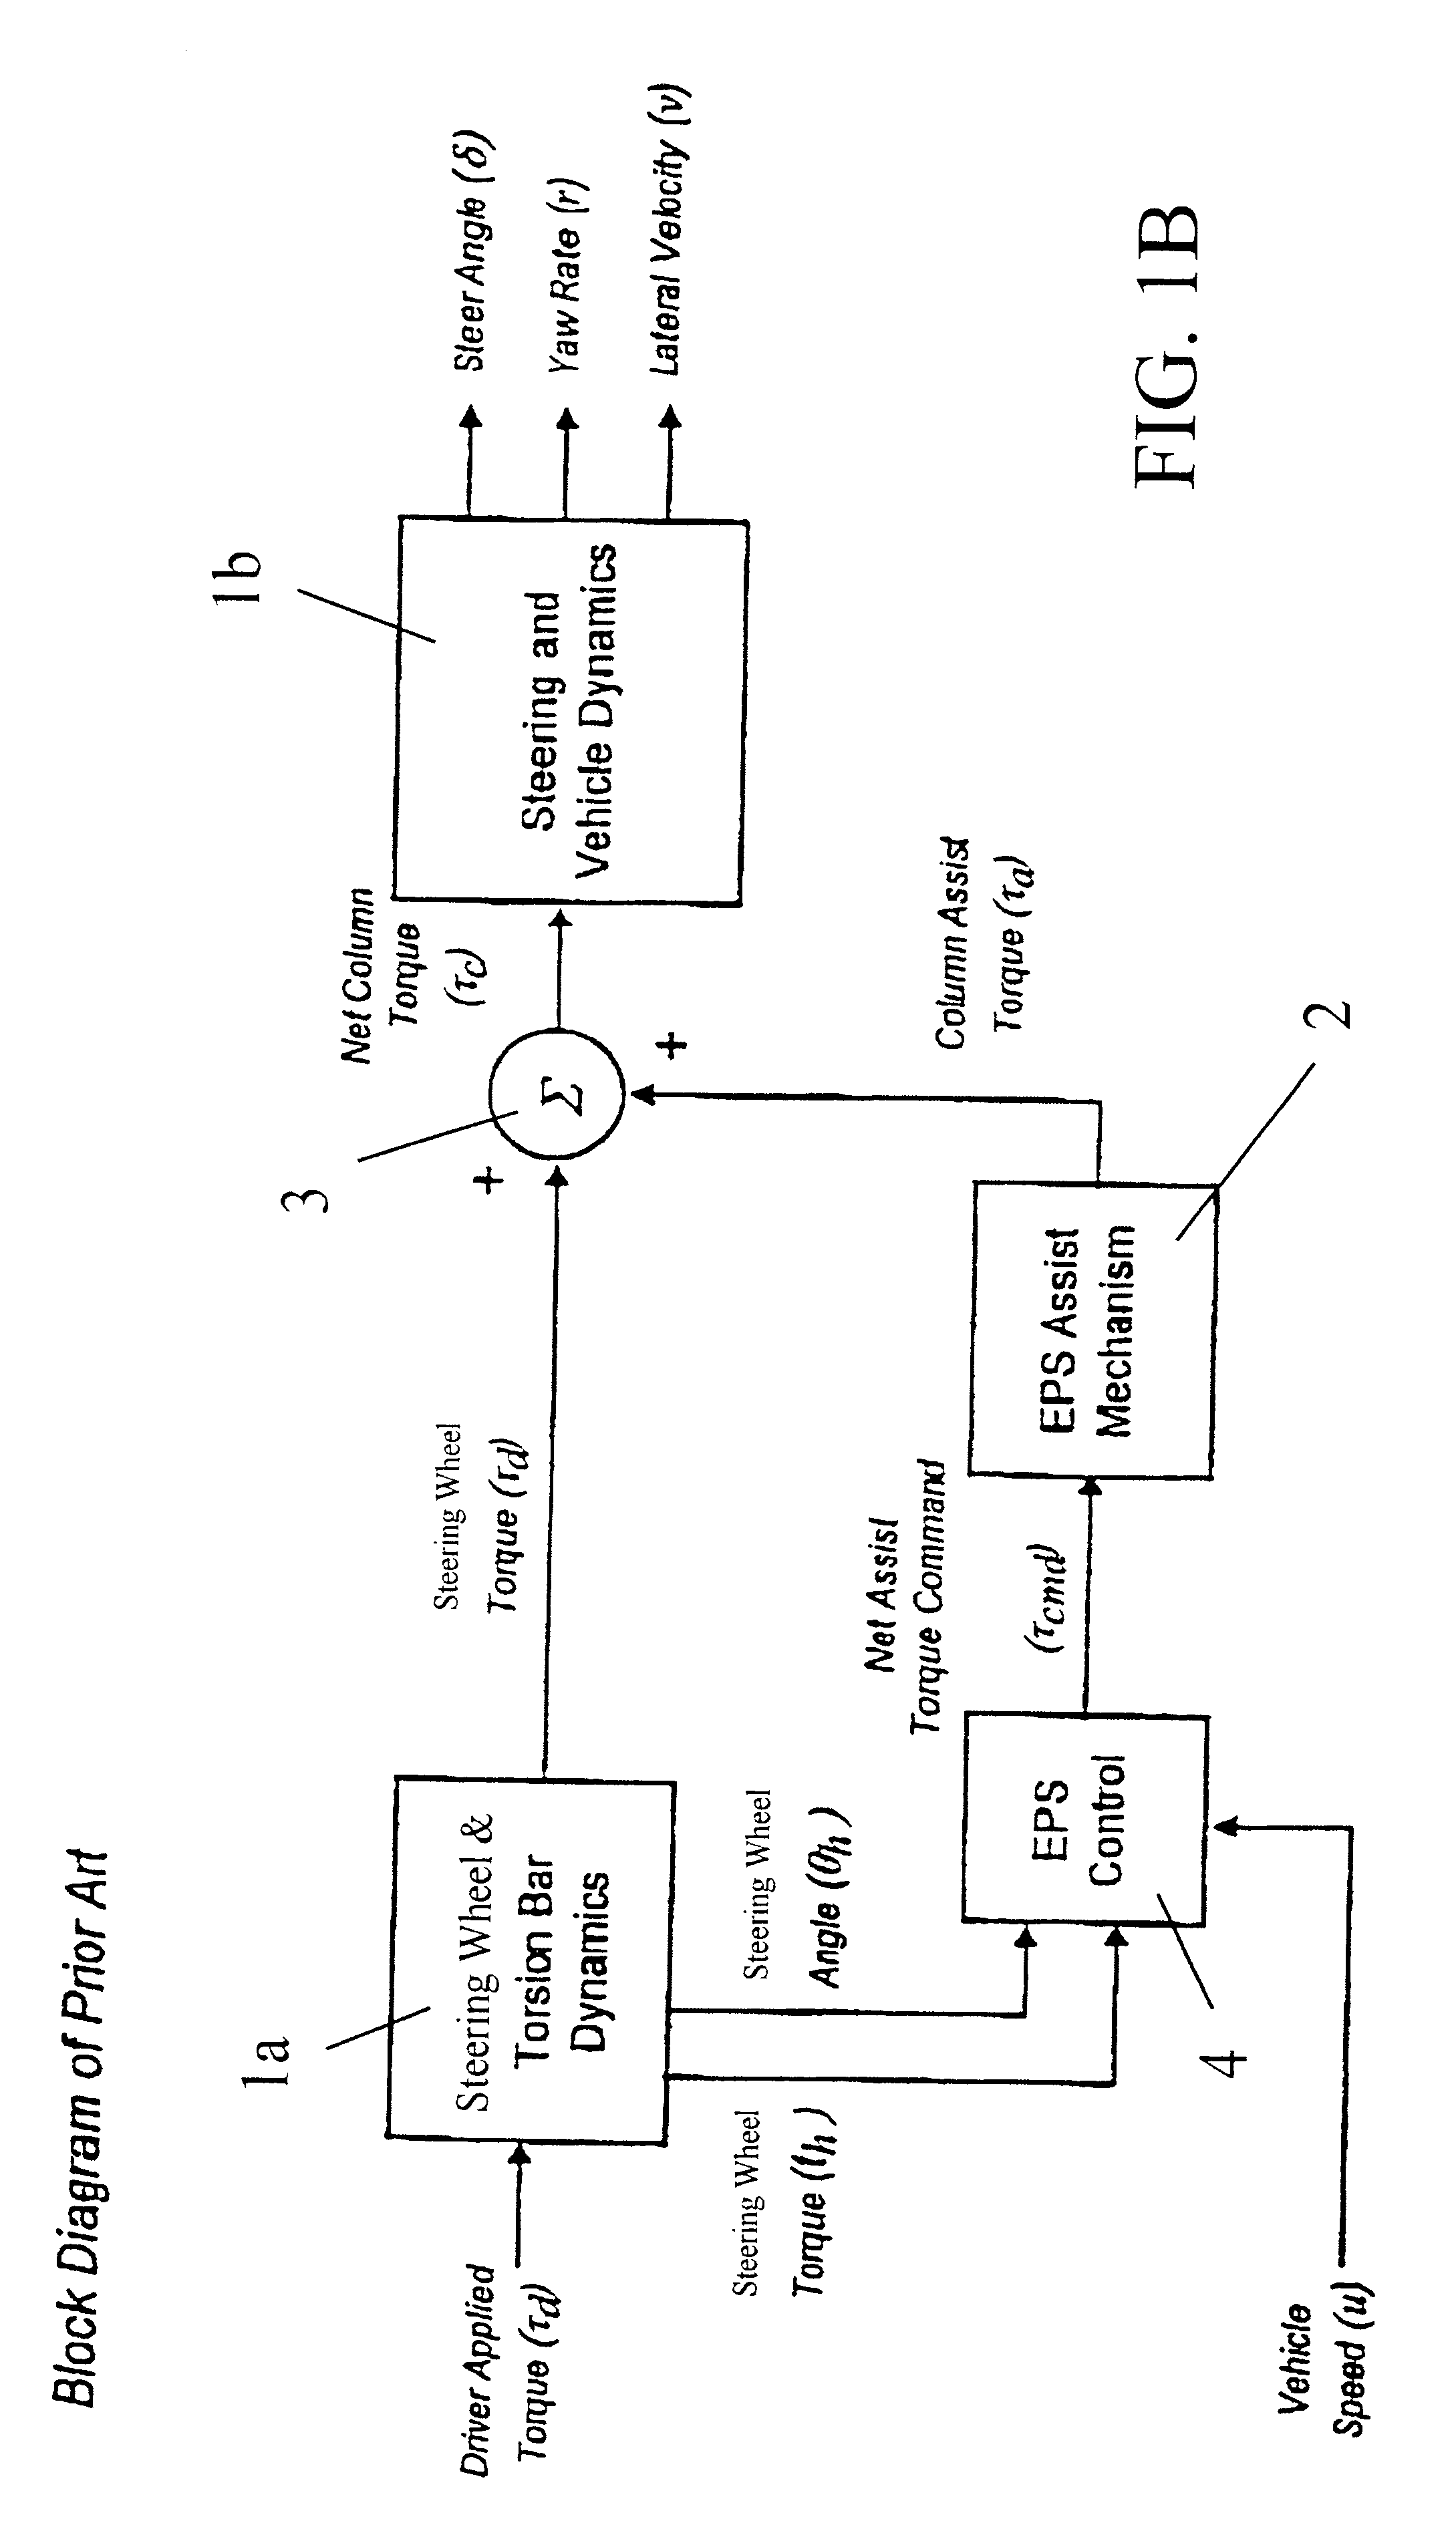 Method and system for improving motor vehicle stability incorporating an electric power steering system